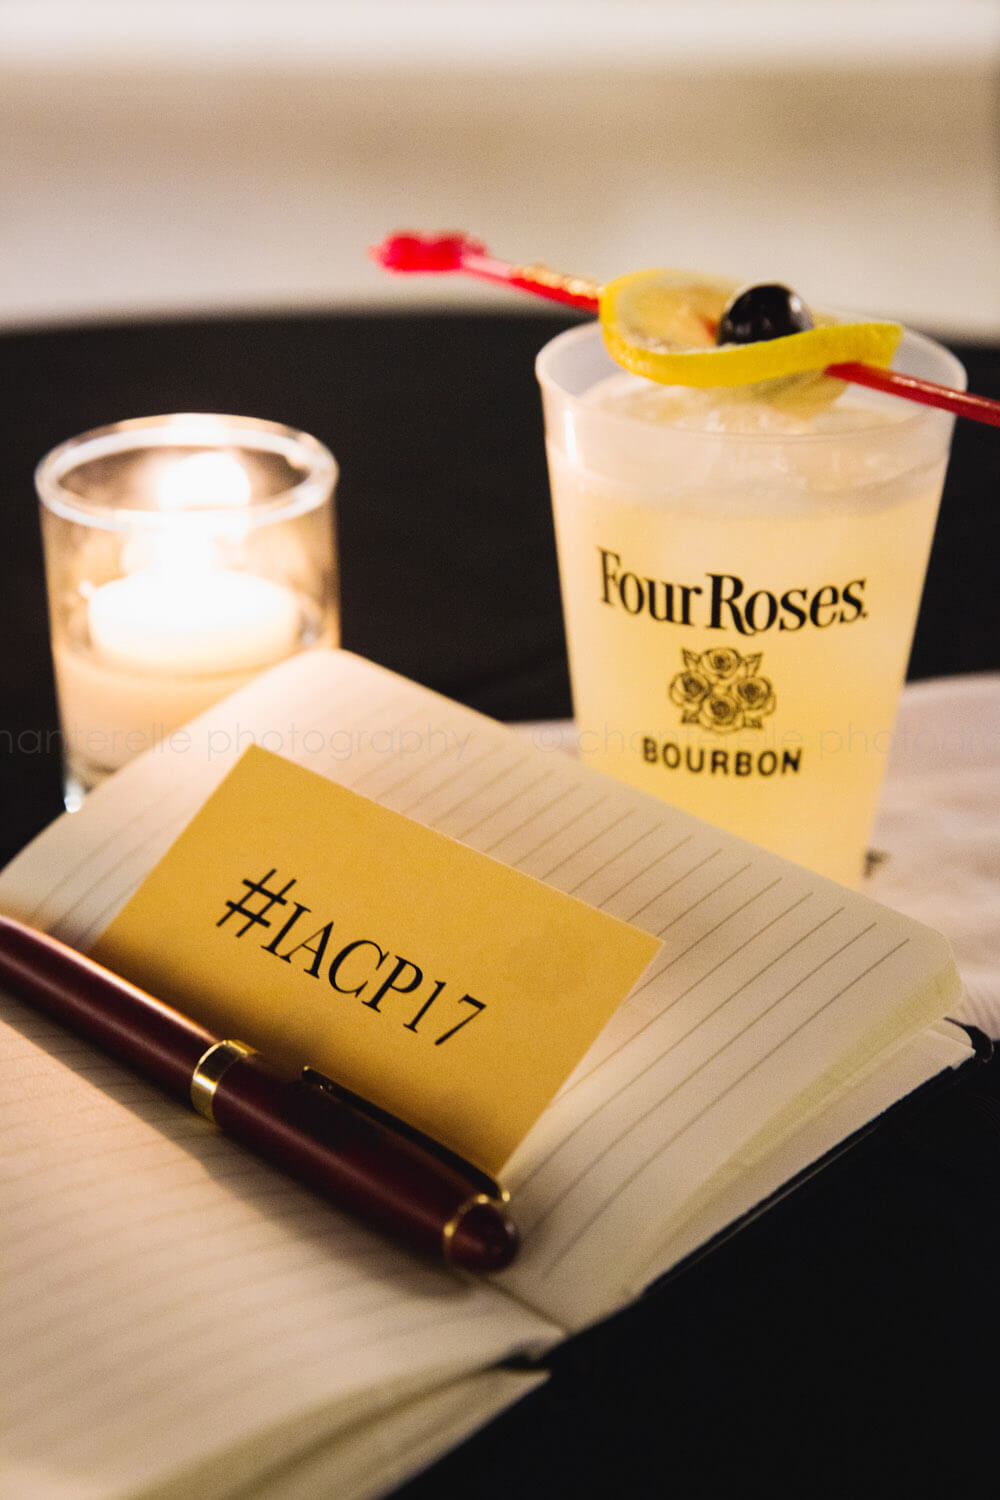 iacp 2017 conference sponsor four roses